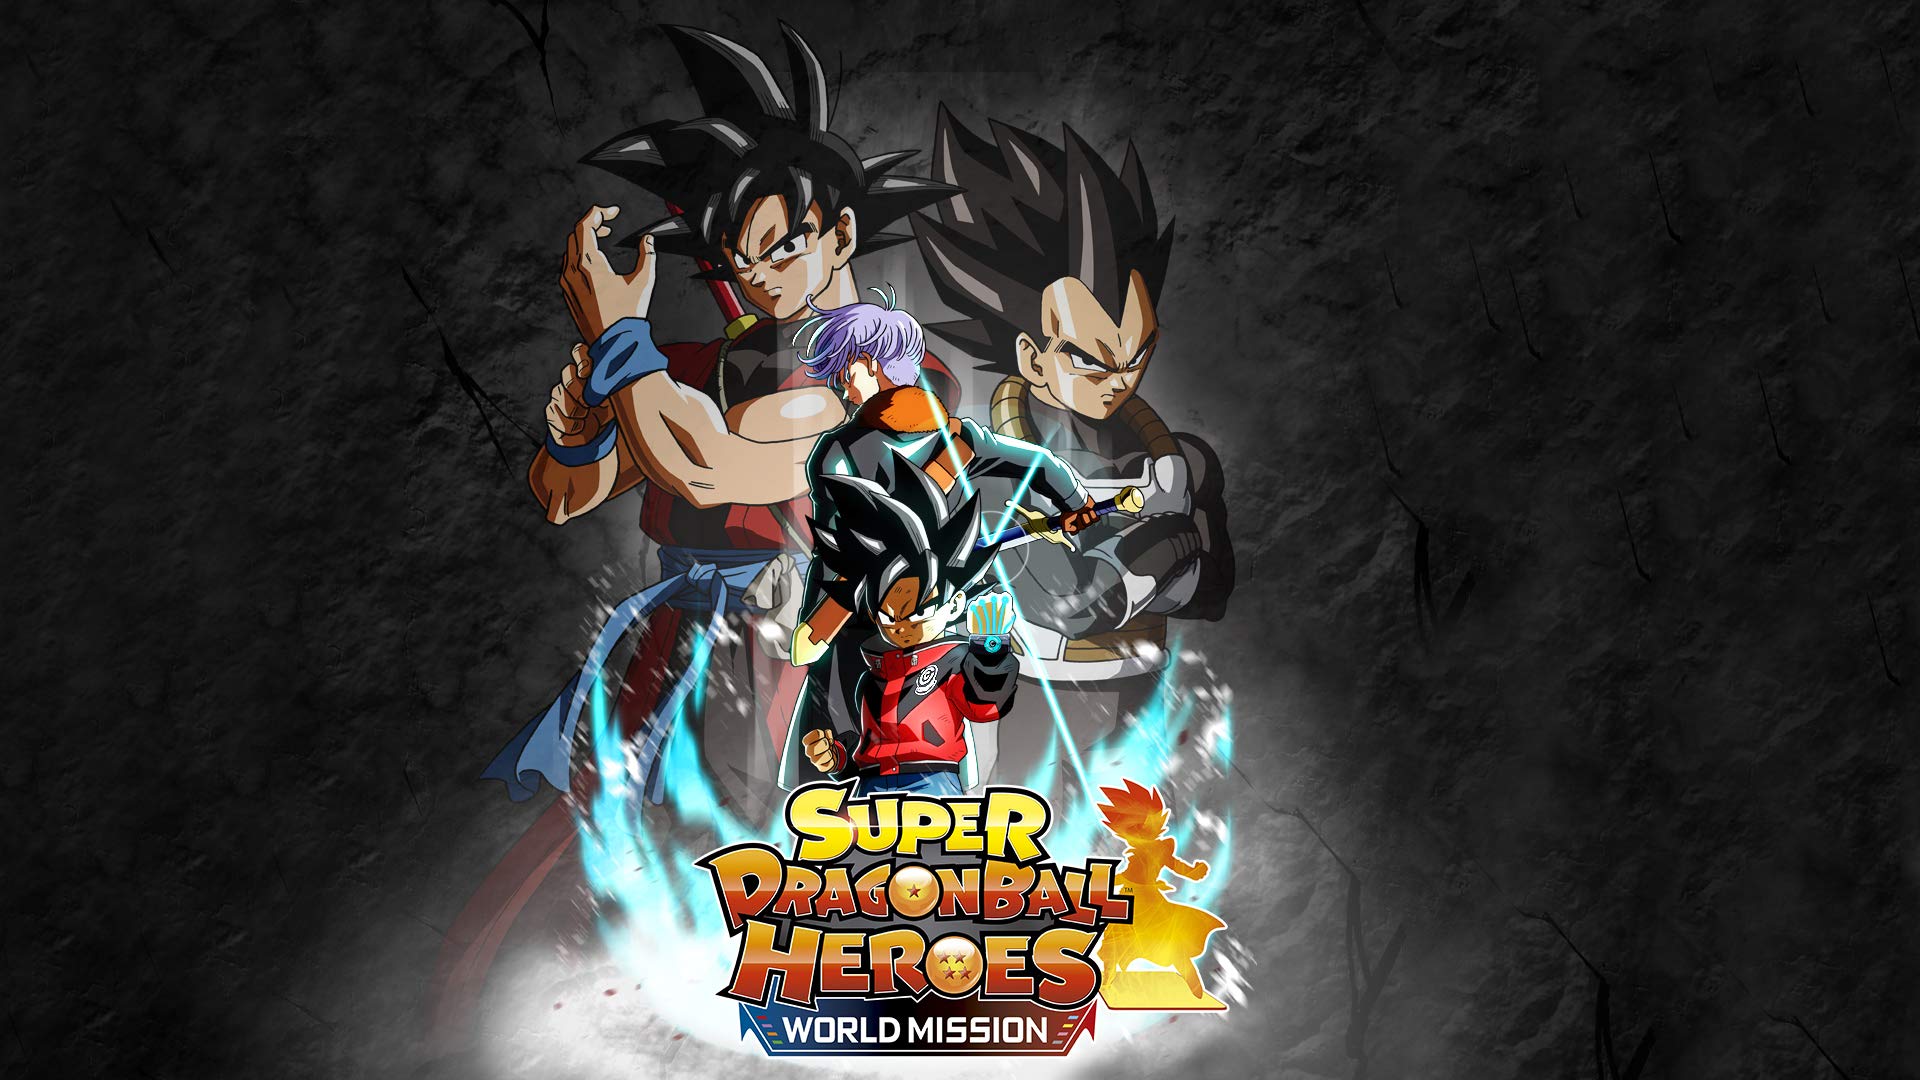 Super Dragon Ball Heroes World Mission Cover - HD Wallpaper 